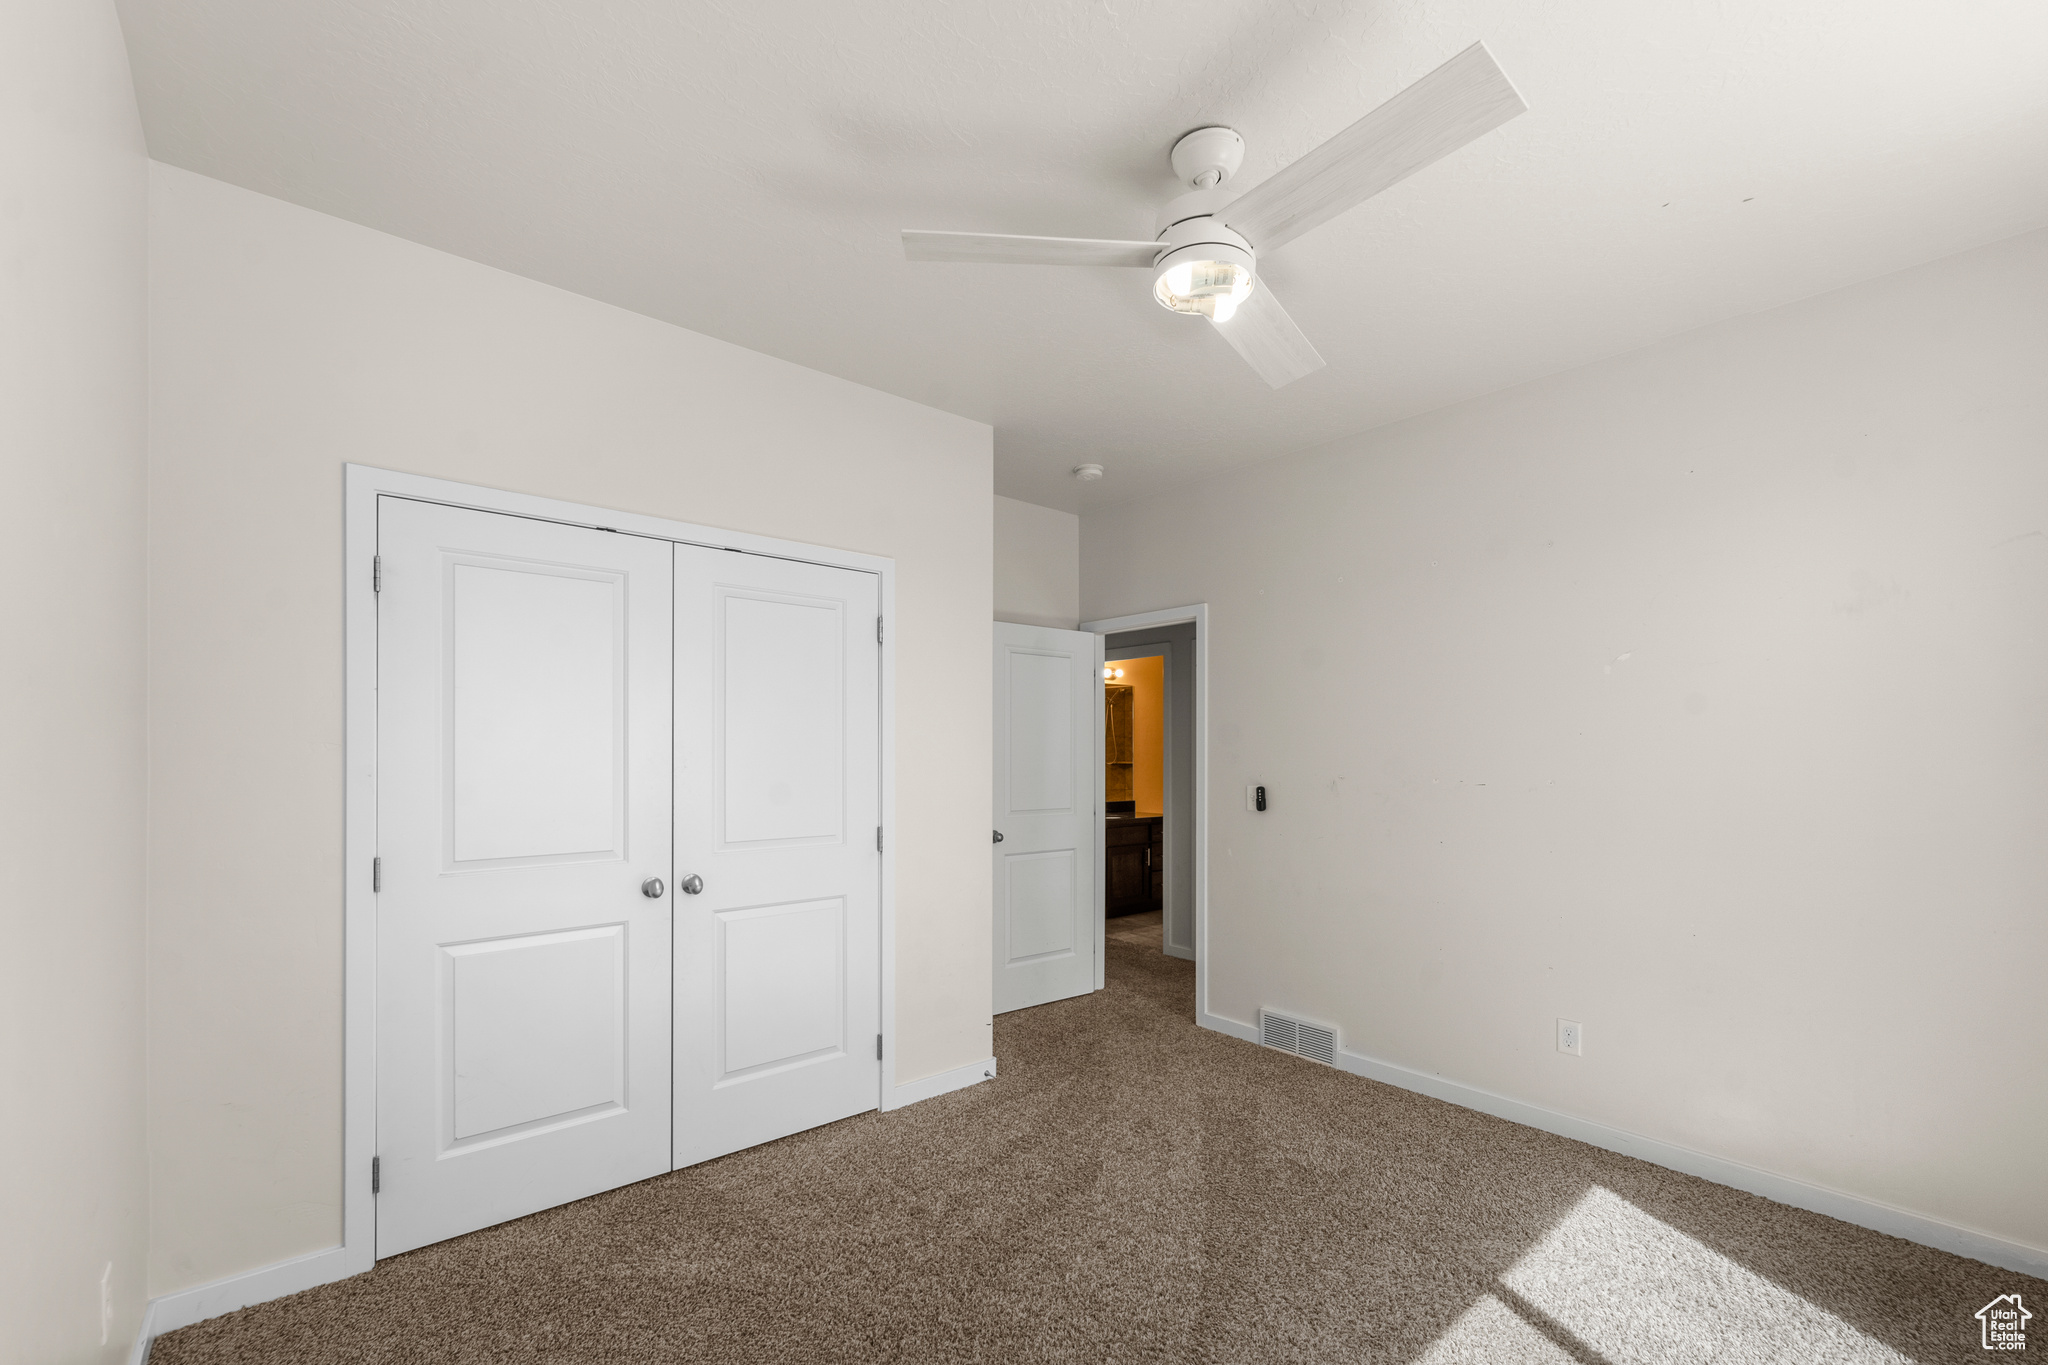 Unfurnished bedroom with ceiling fan, a closet, and dark colored carpet